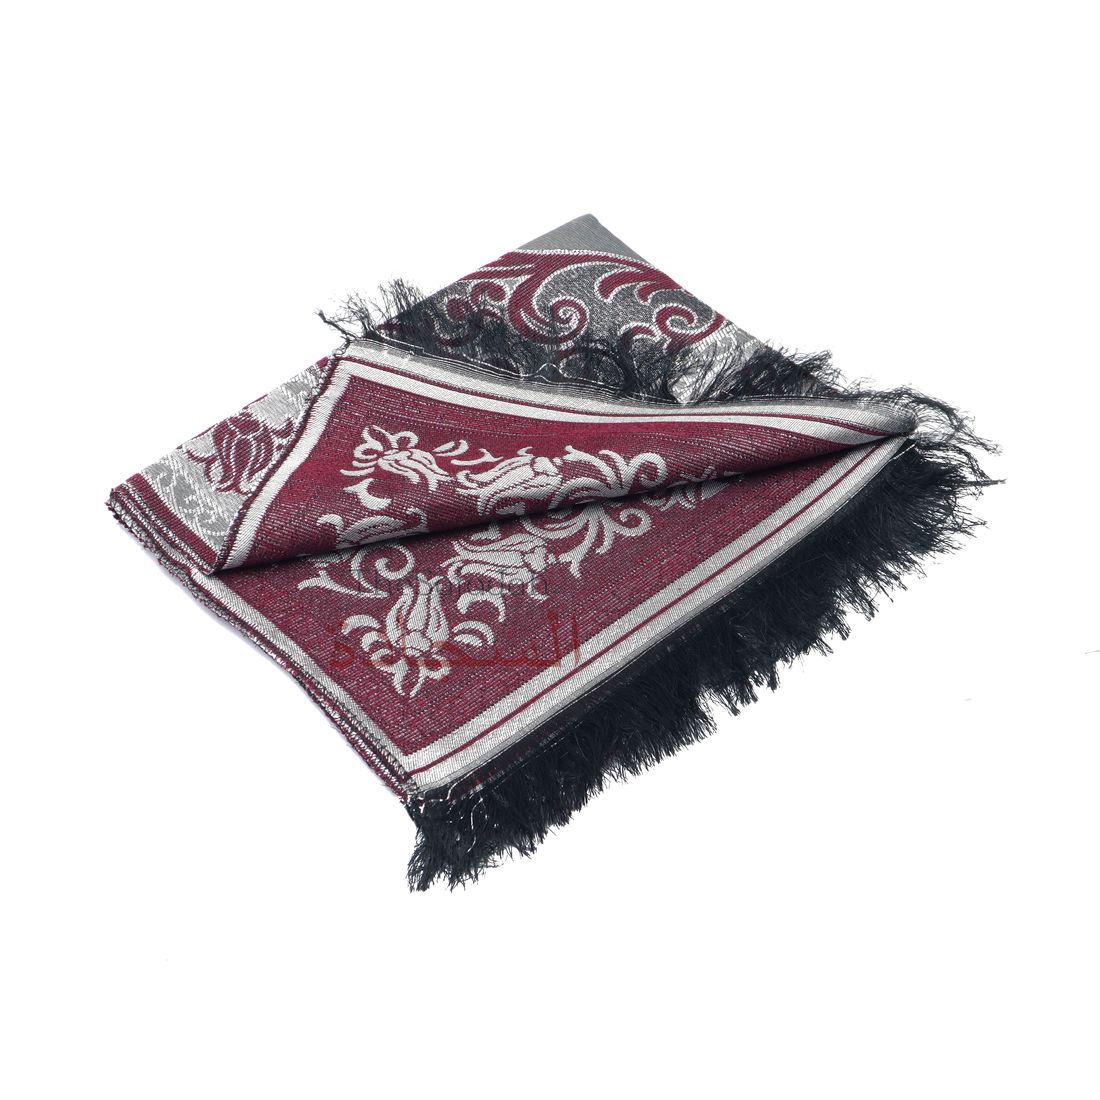 Wine Red Thin Prayer Rug 47×25-inch – Perfect for Travel, Folds Small